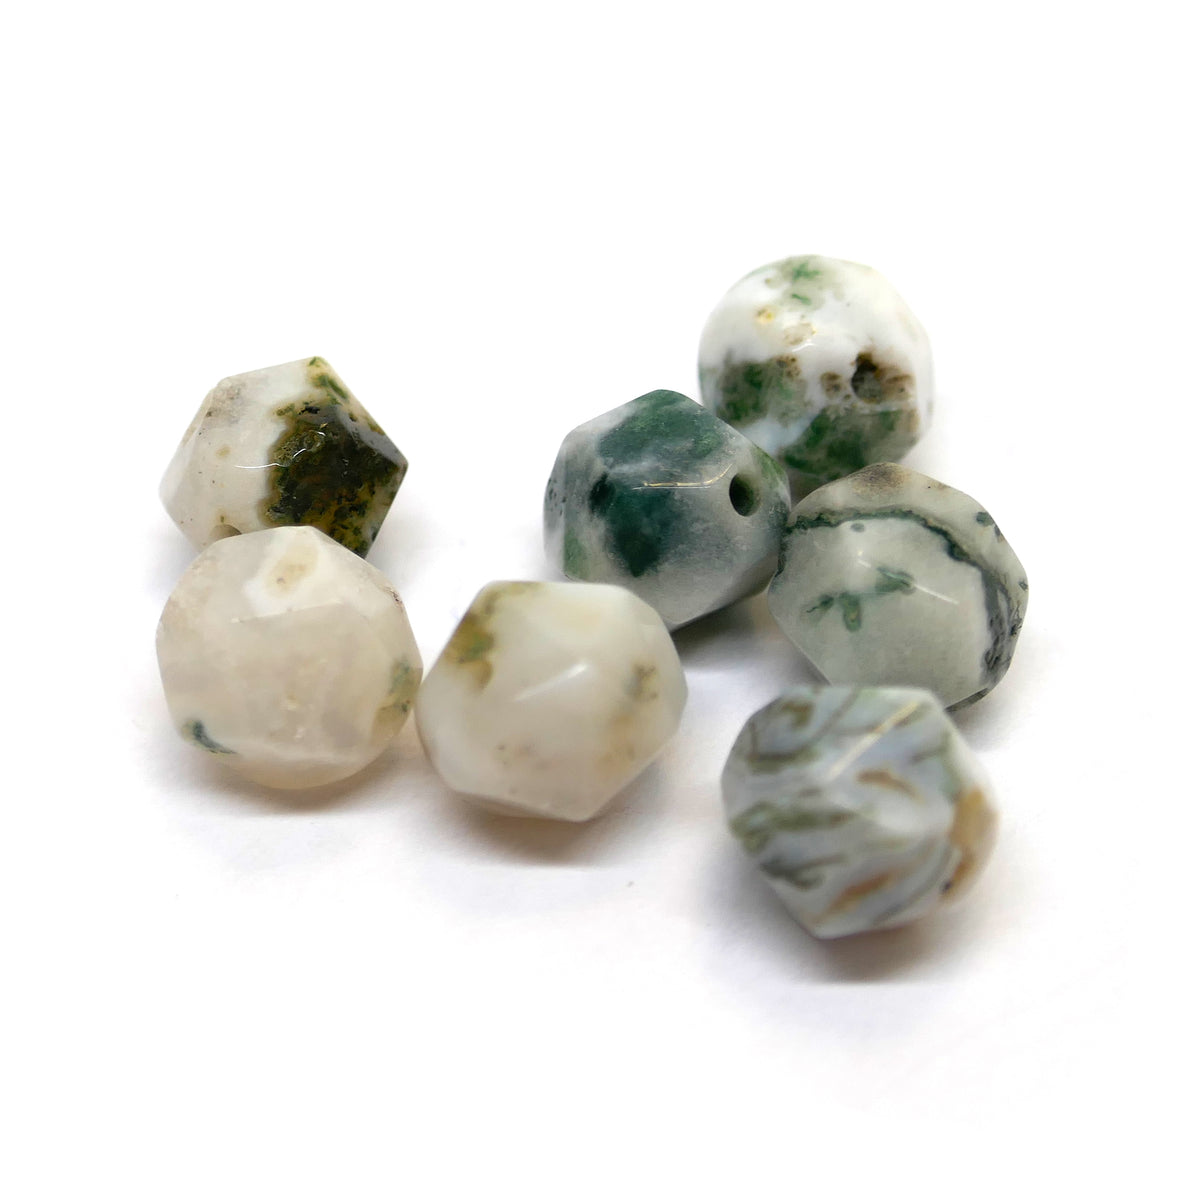 Tree Agate Beads, Natural 8mm Smooth Round Beads, 10 pcs – Cameos Art Shop